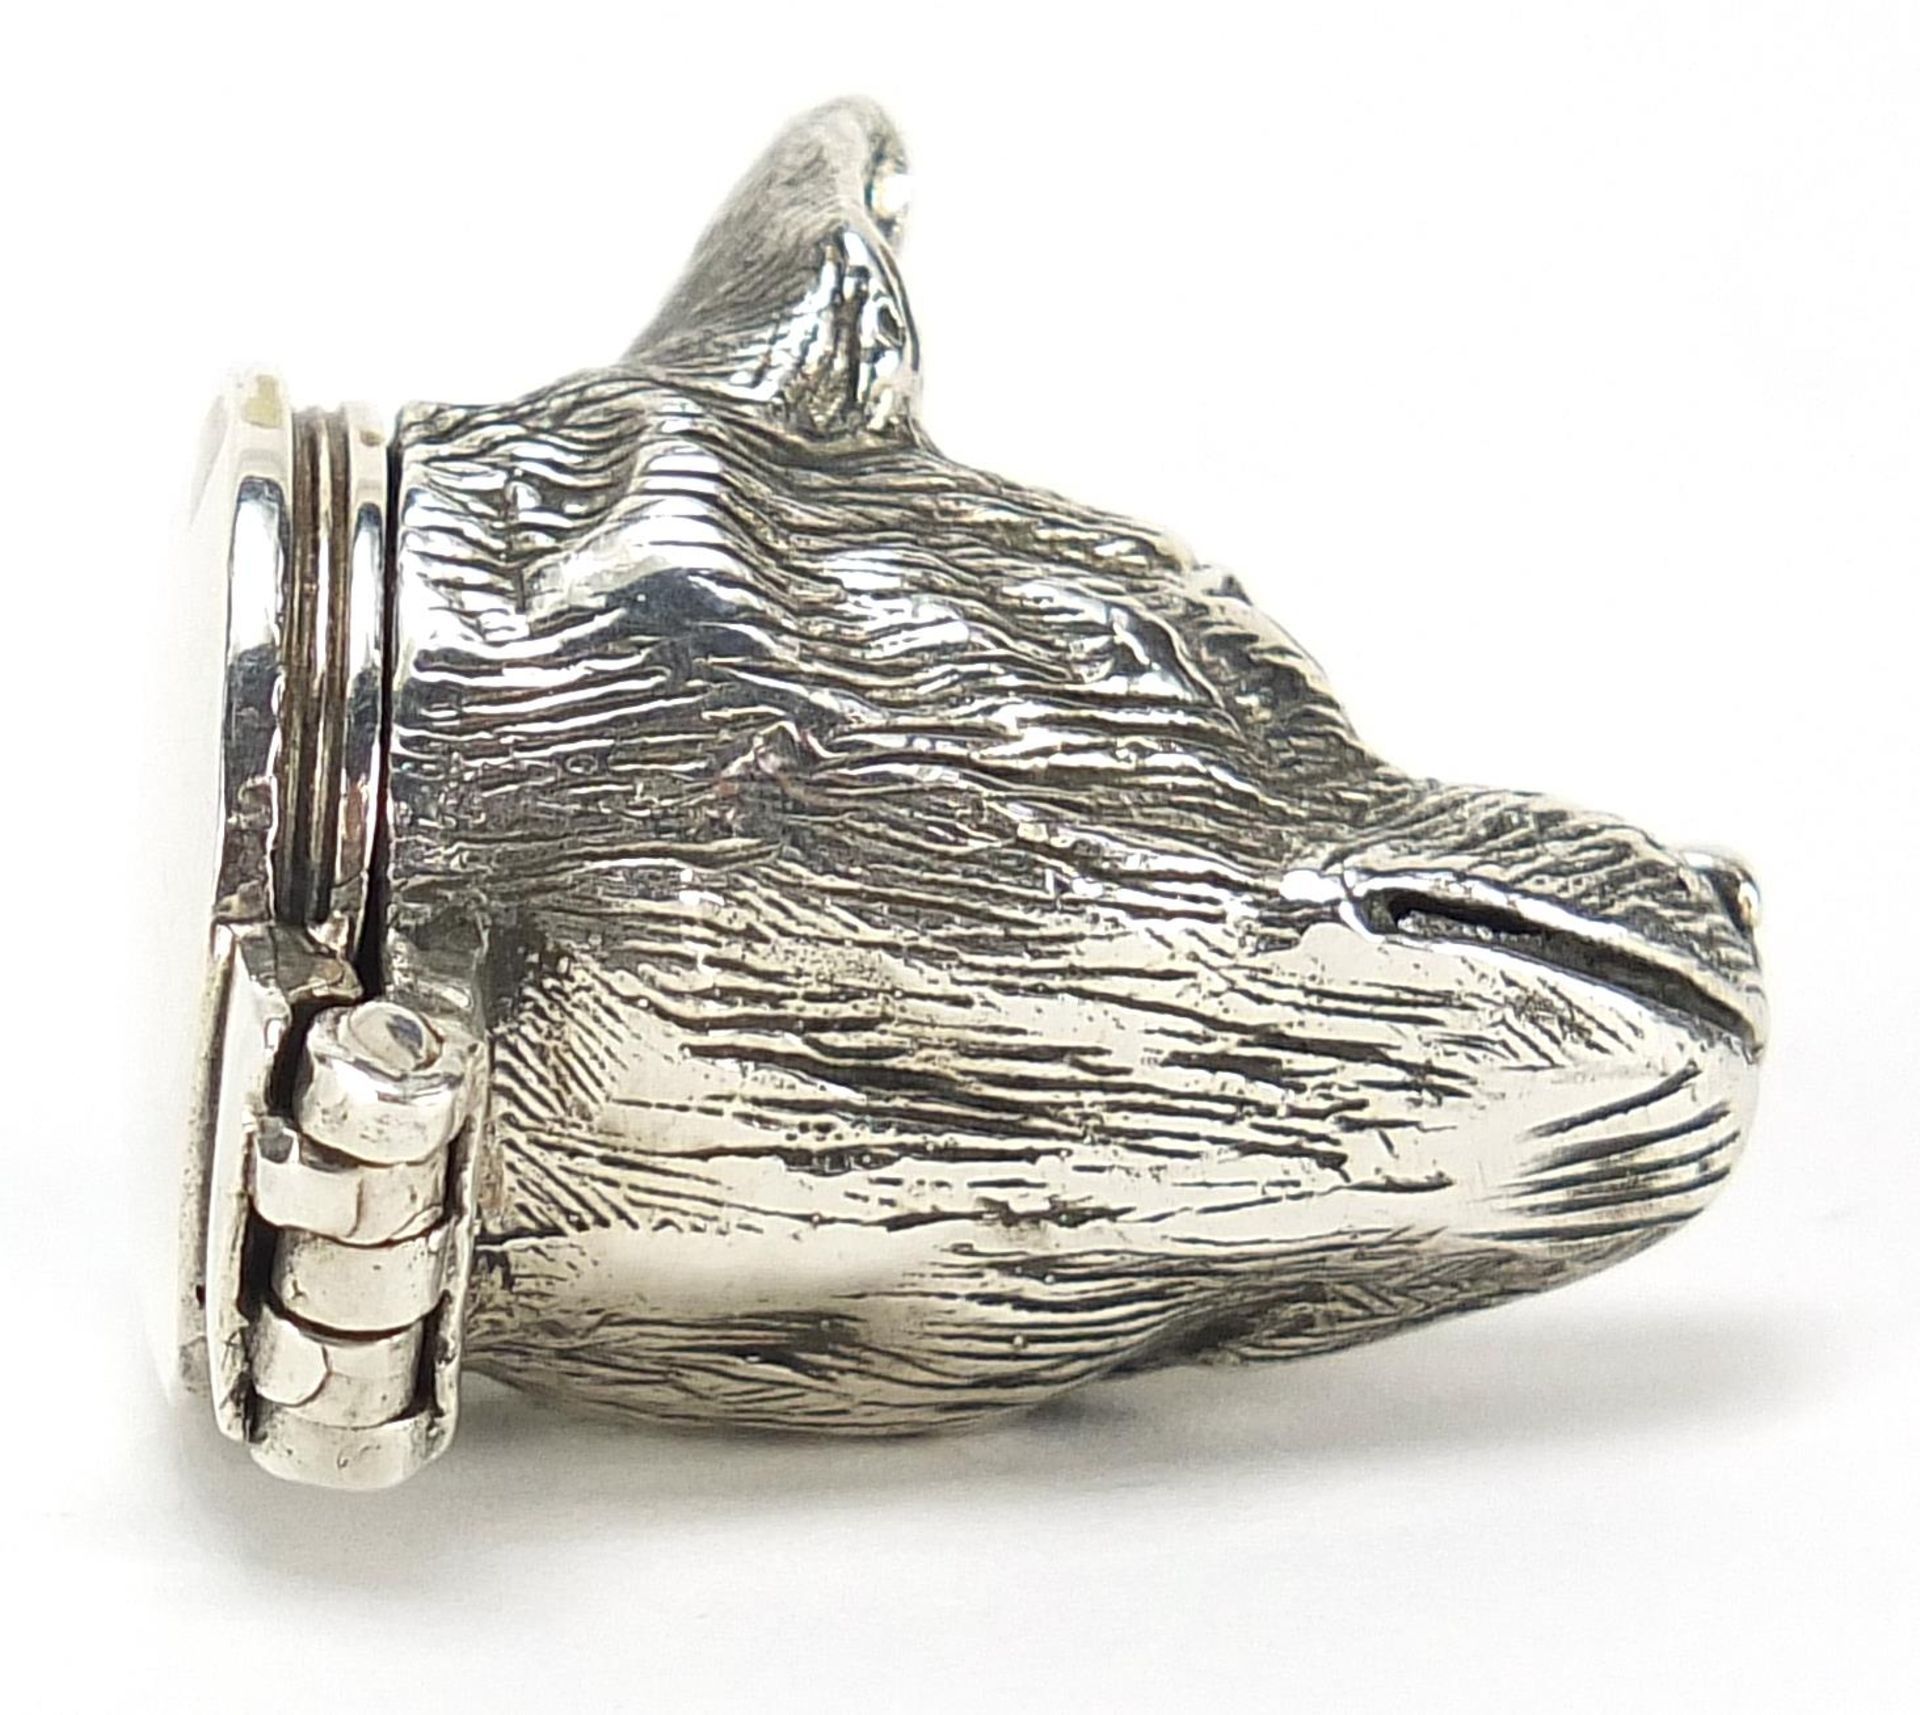 Novelty silver dog's head trinket with hinged lid, 3.2cm high, 34.8g - Image 4 of 4